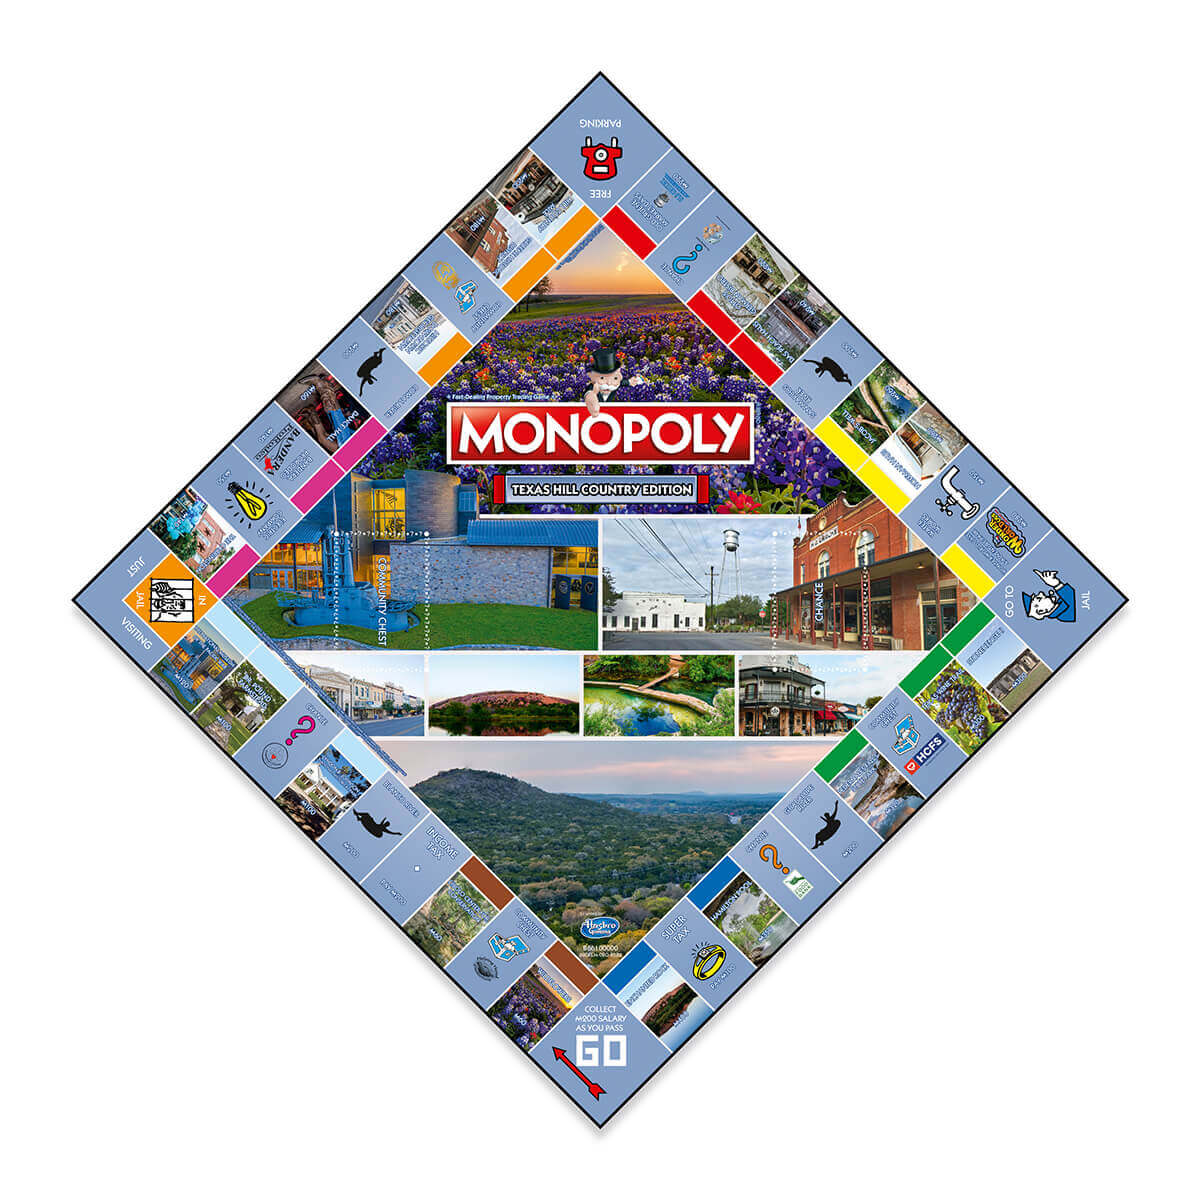 Texas Hill Country Monopoly Board Game